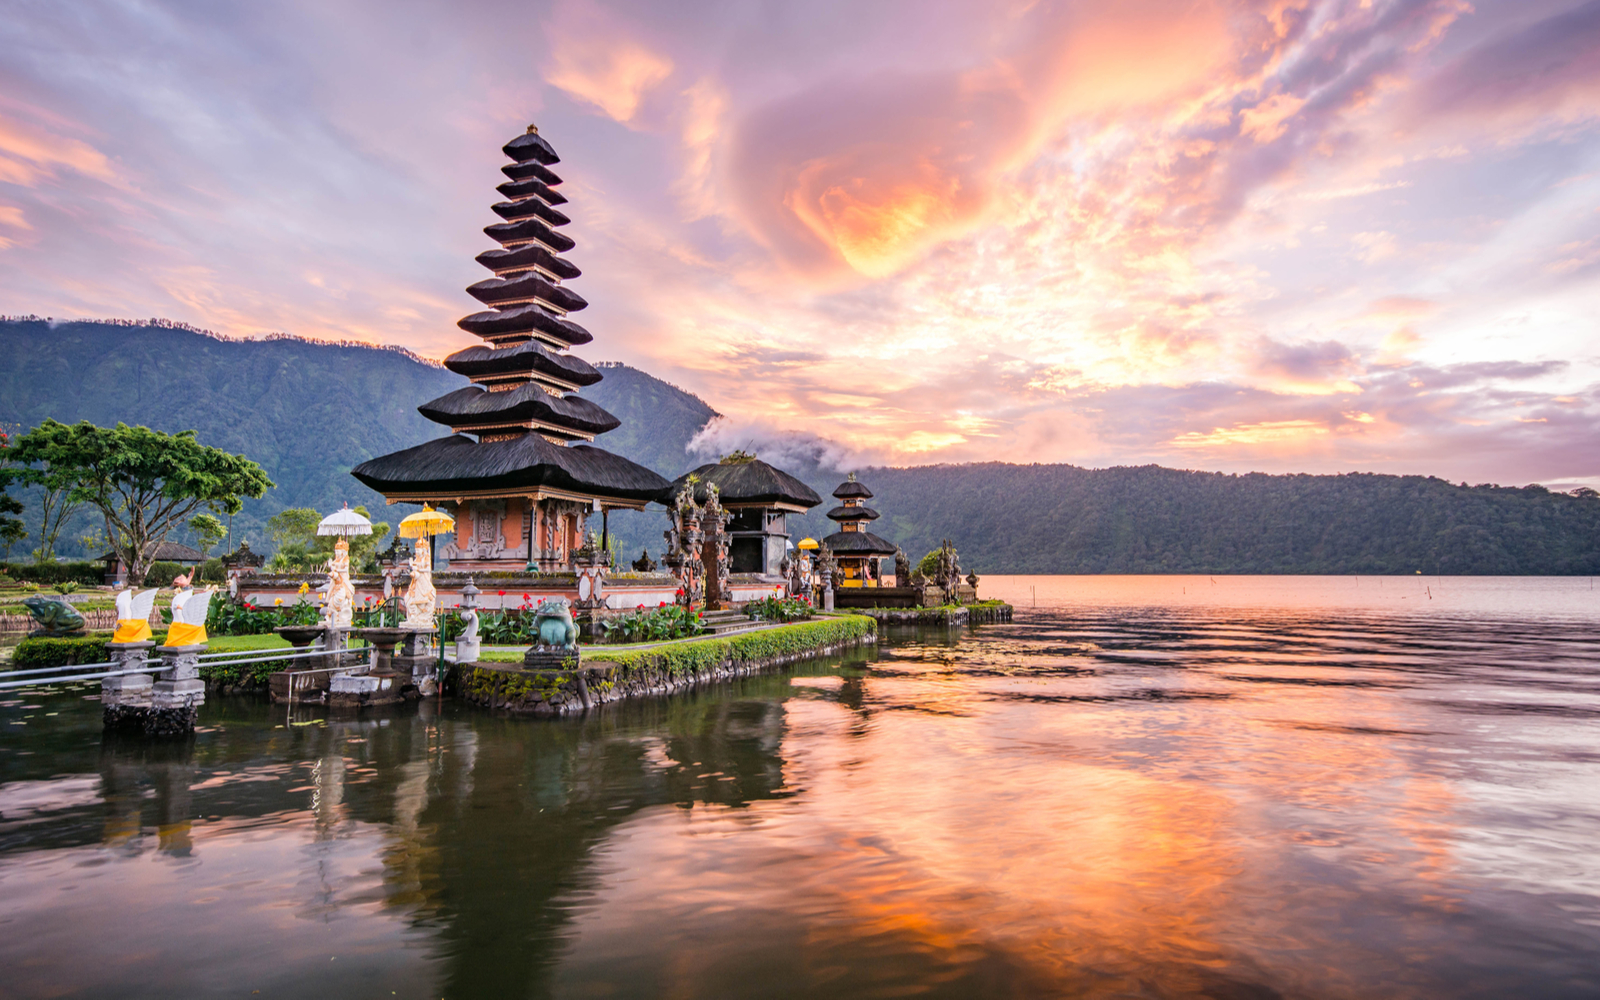 Pura Ulun Danu Bratan pictured at sunset during the best time to visit Bali